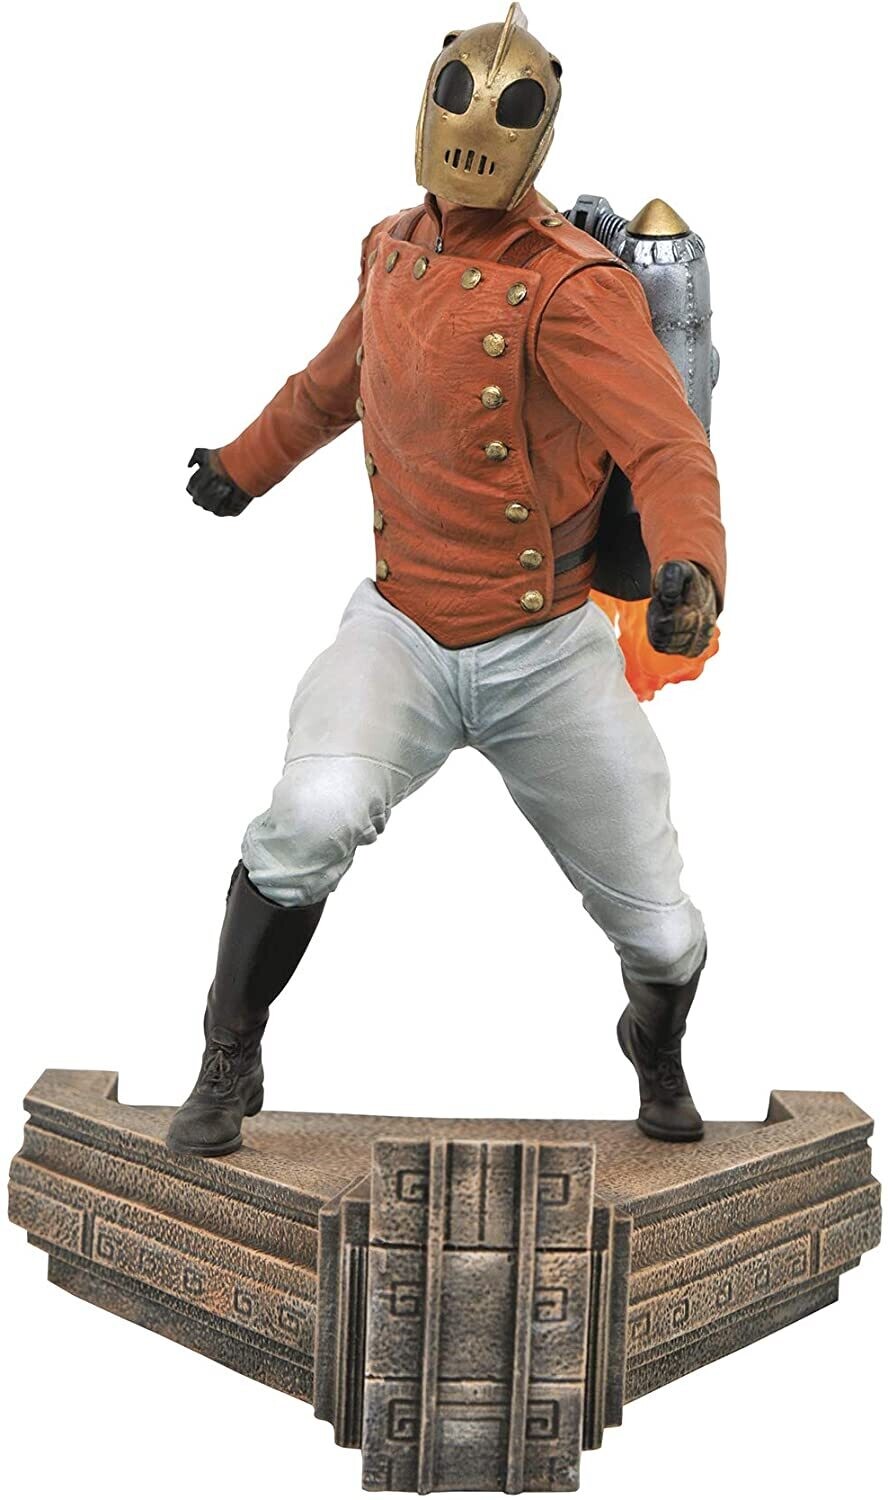 The Rocketeer Premier limited edition Statue